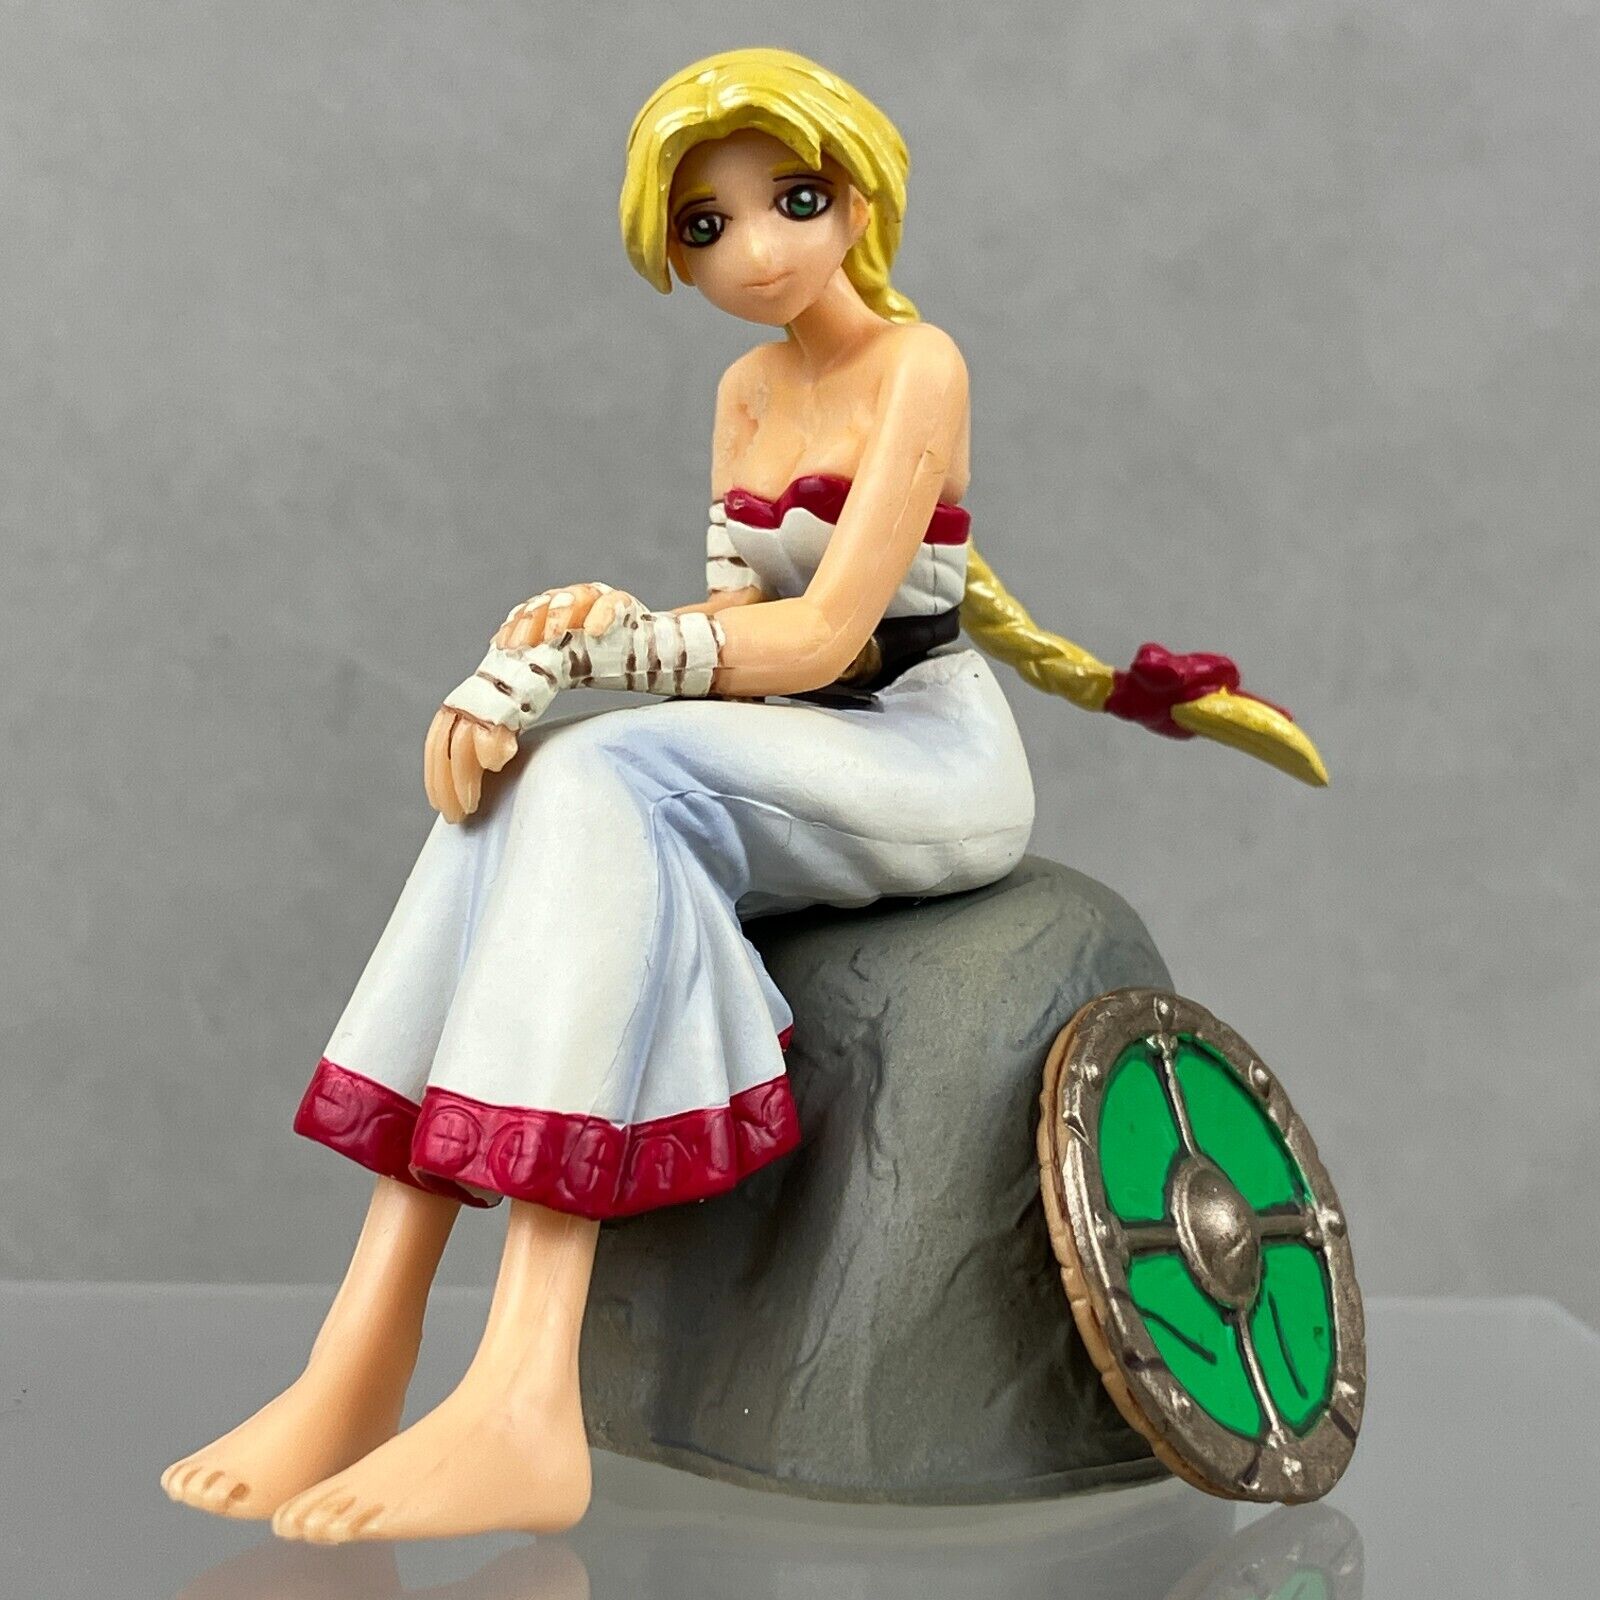 Yujin The Legend of Valkyrie Gals SR Super Real Collection Anime Figure